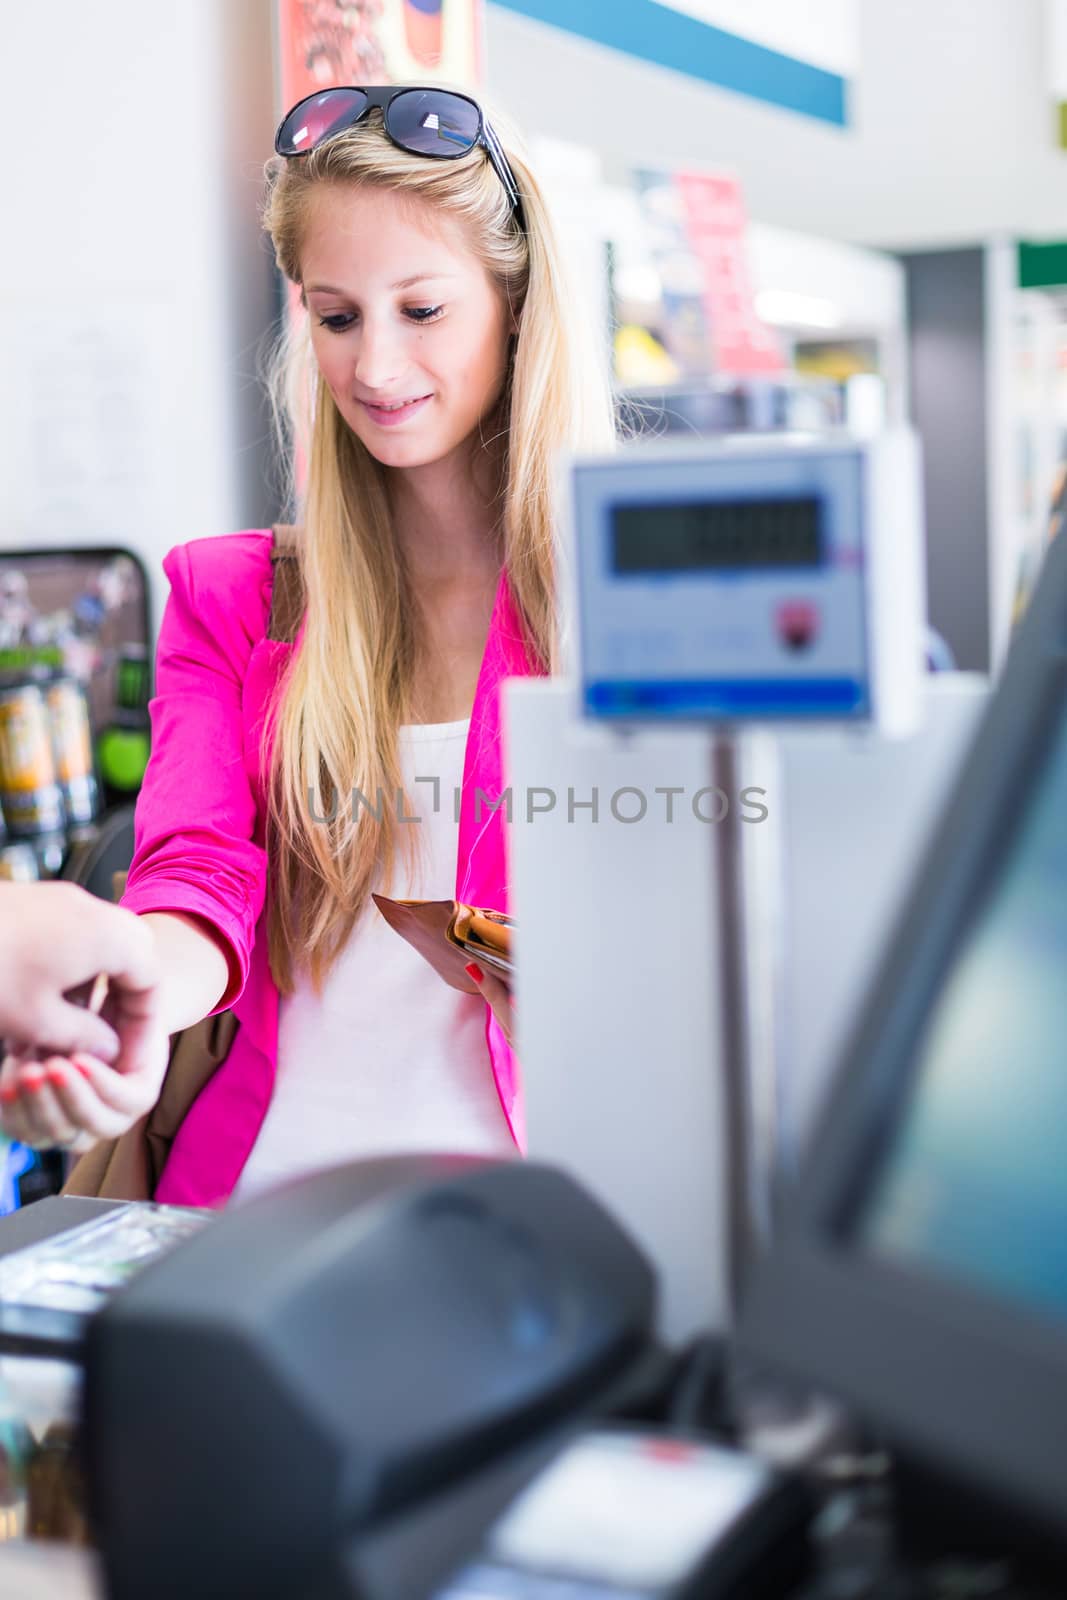 Beautiful young woman paying for her groceries at the counter of a grocery store/supermarket (color toned image)